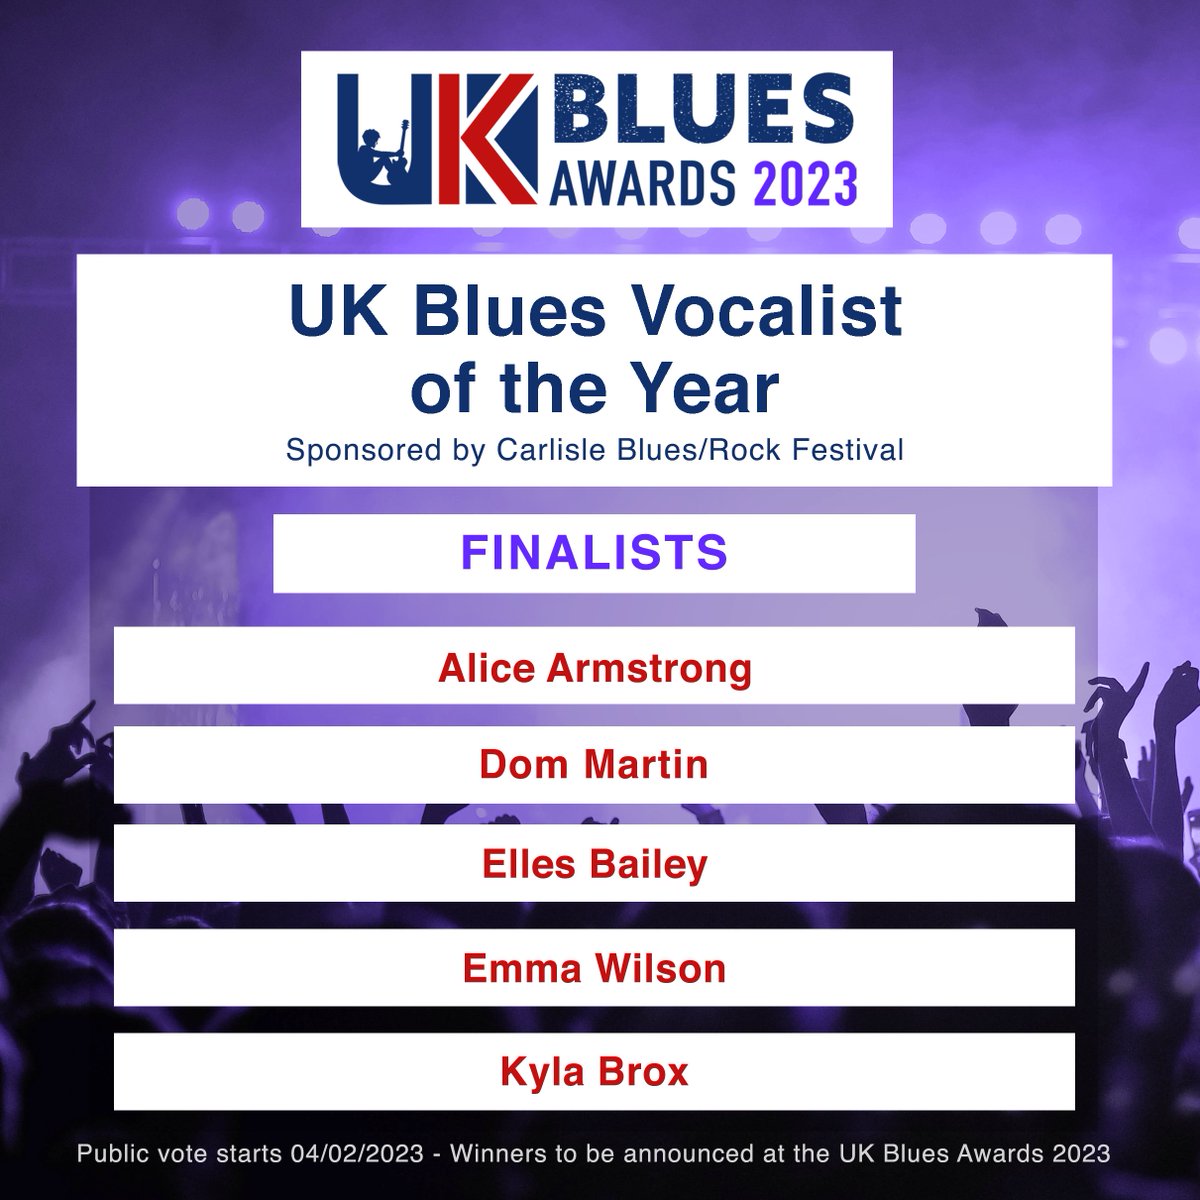 Today's the day we reveal the top 5 nominees who are the Finalists in each category in The UK Blues Awards. Congratulations to all involved! Public voting starts on 4th February so watch out for the link then. Finally let's have the Vocalist of The Year category Finalists